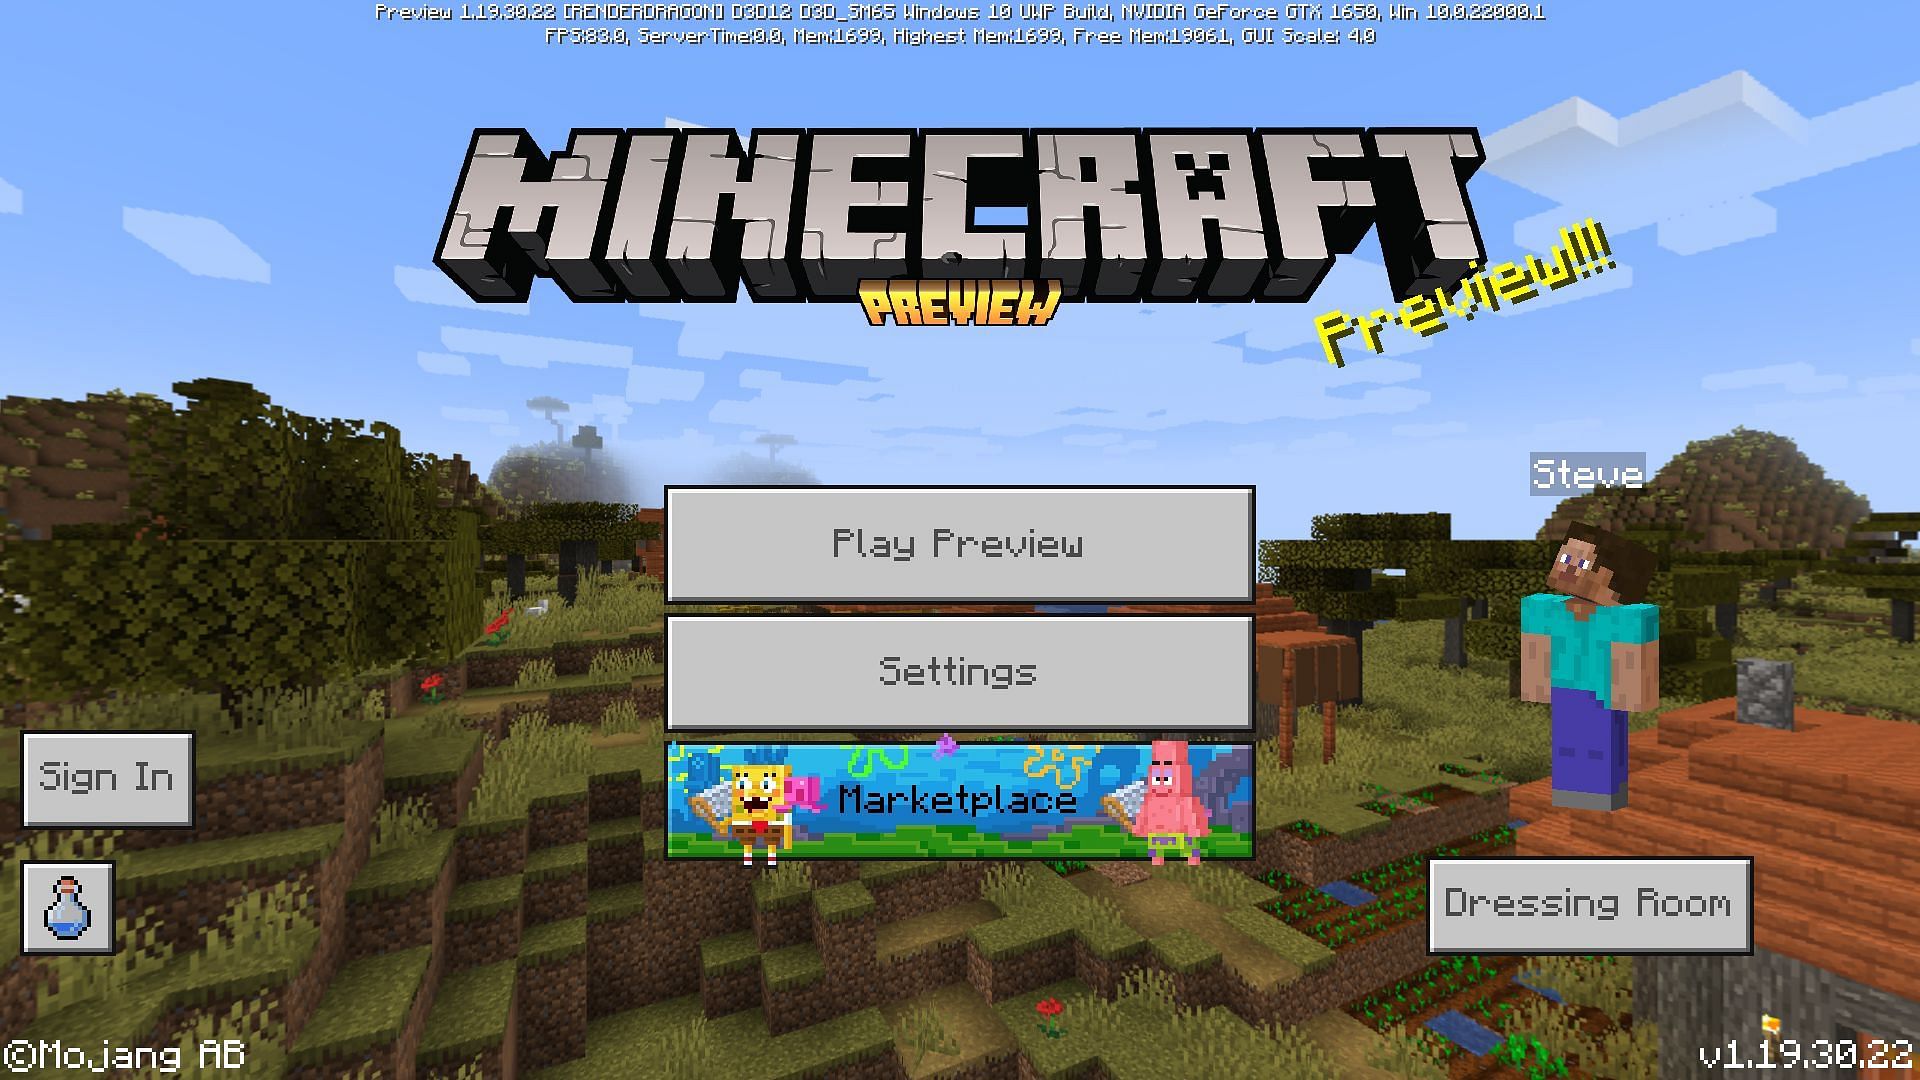 Players can normally open the game and play (Image via Mojang)